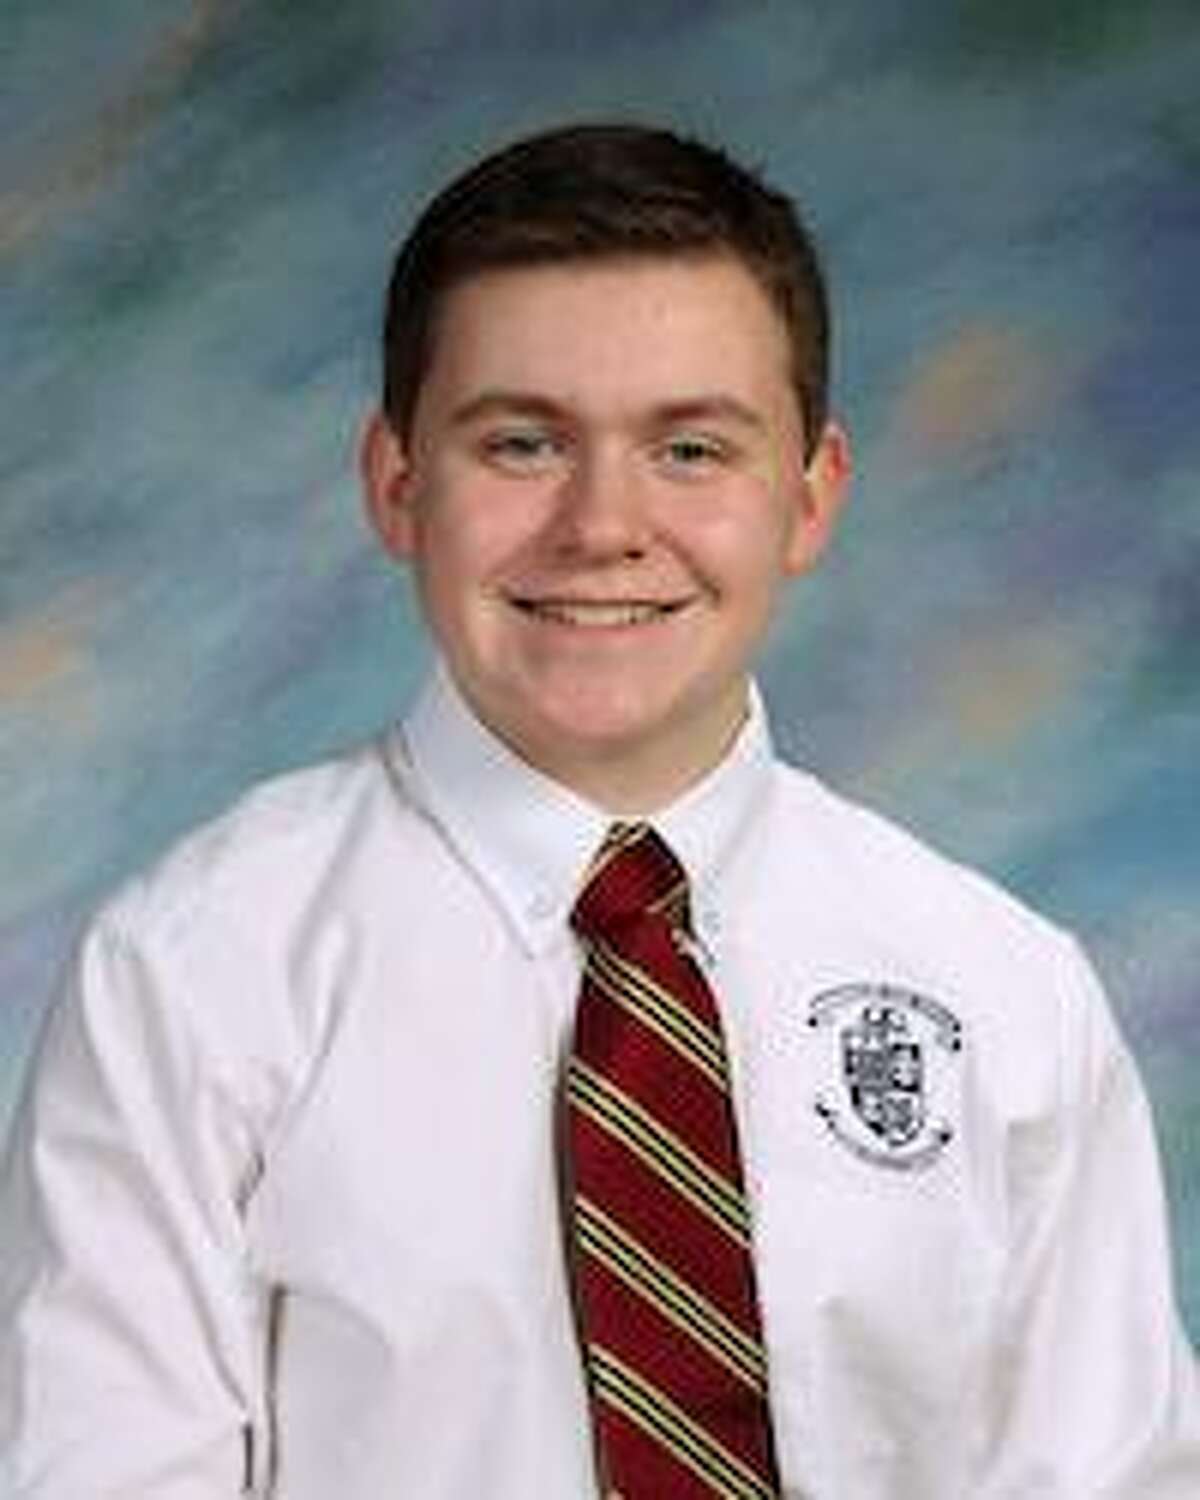 William Doran received an 800 score on the Math SAT section. He is one of six students from the Immaculate High School in Danbury, have achieved perfect test scores on the ACT and the SAT college admission exams.